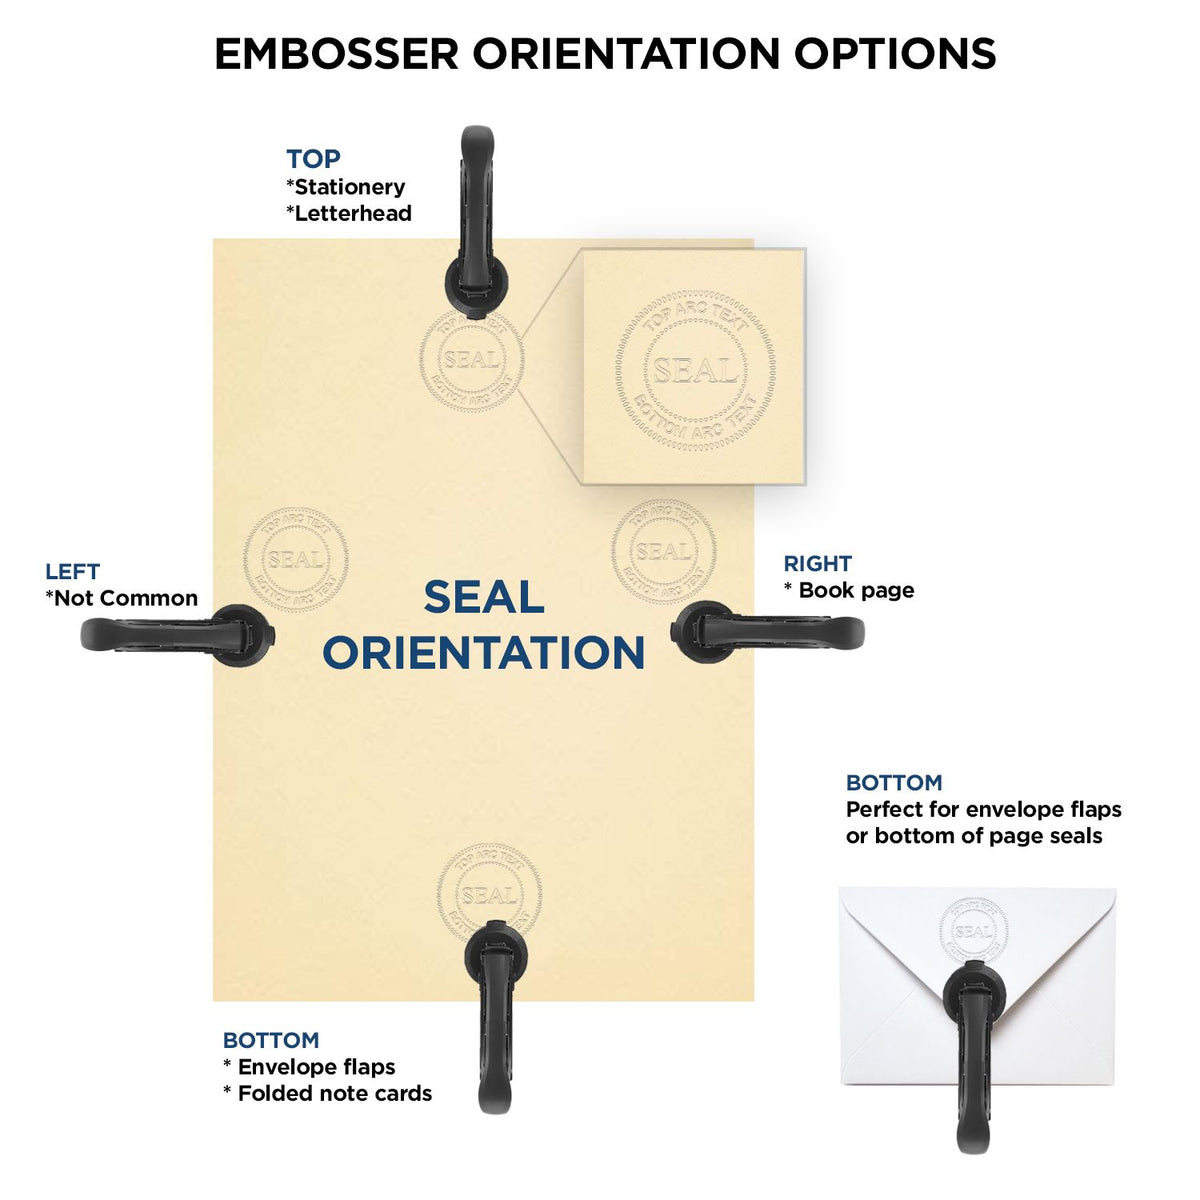 An infographic for the State of Alabama Soft Land Surveyor Embossing Seal showing embosser orientation, this is showing examples of a top, bottom, right and left insert.